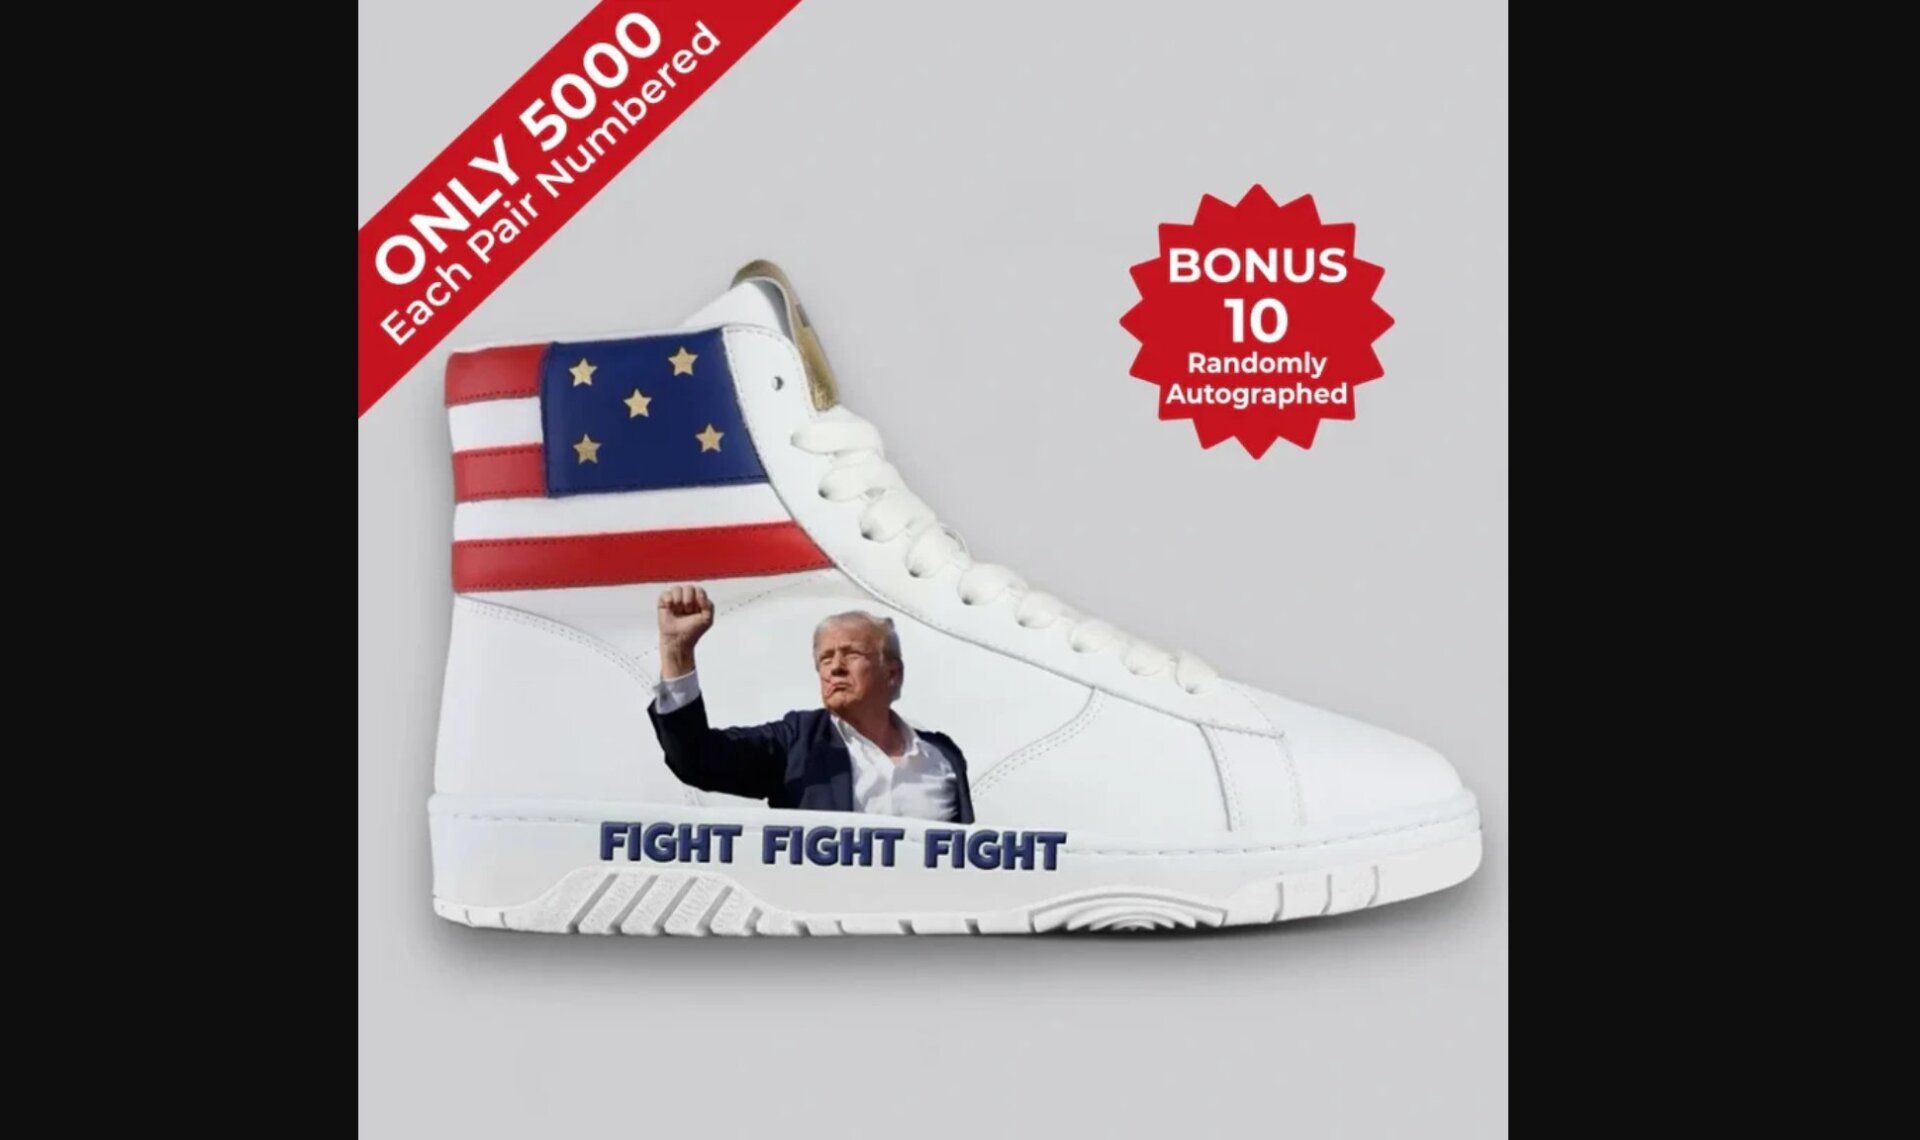 Get Your Trump Assassination Attempt Sneakers Now for Only $299